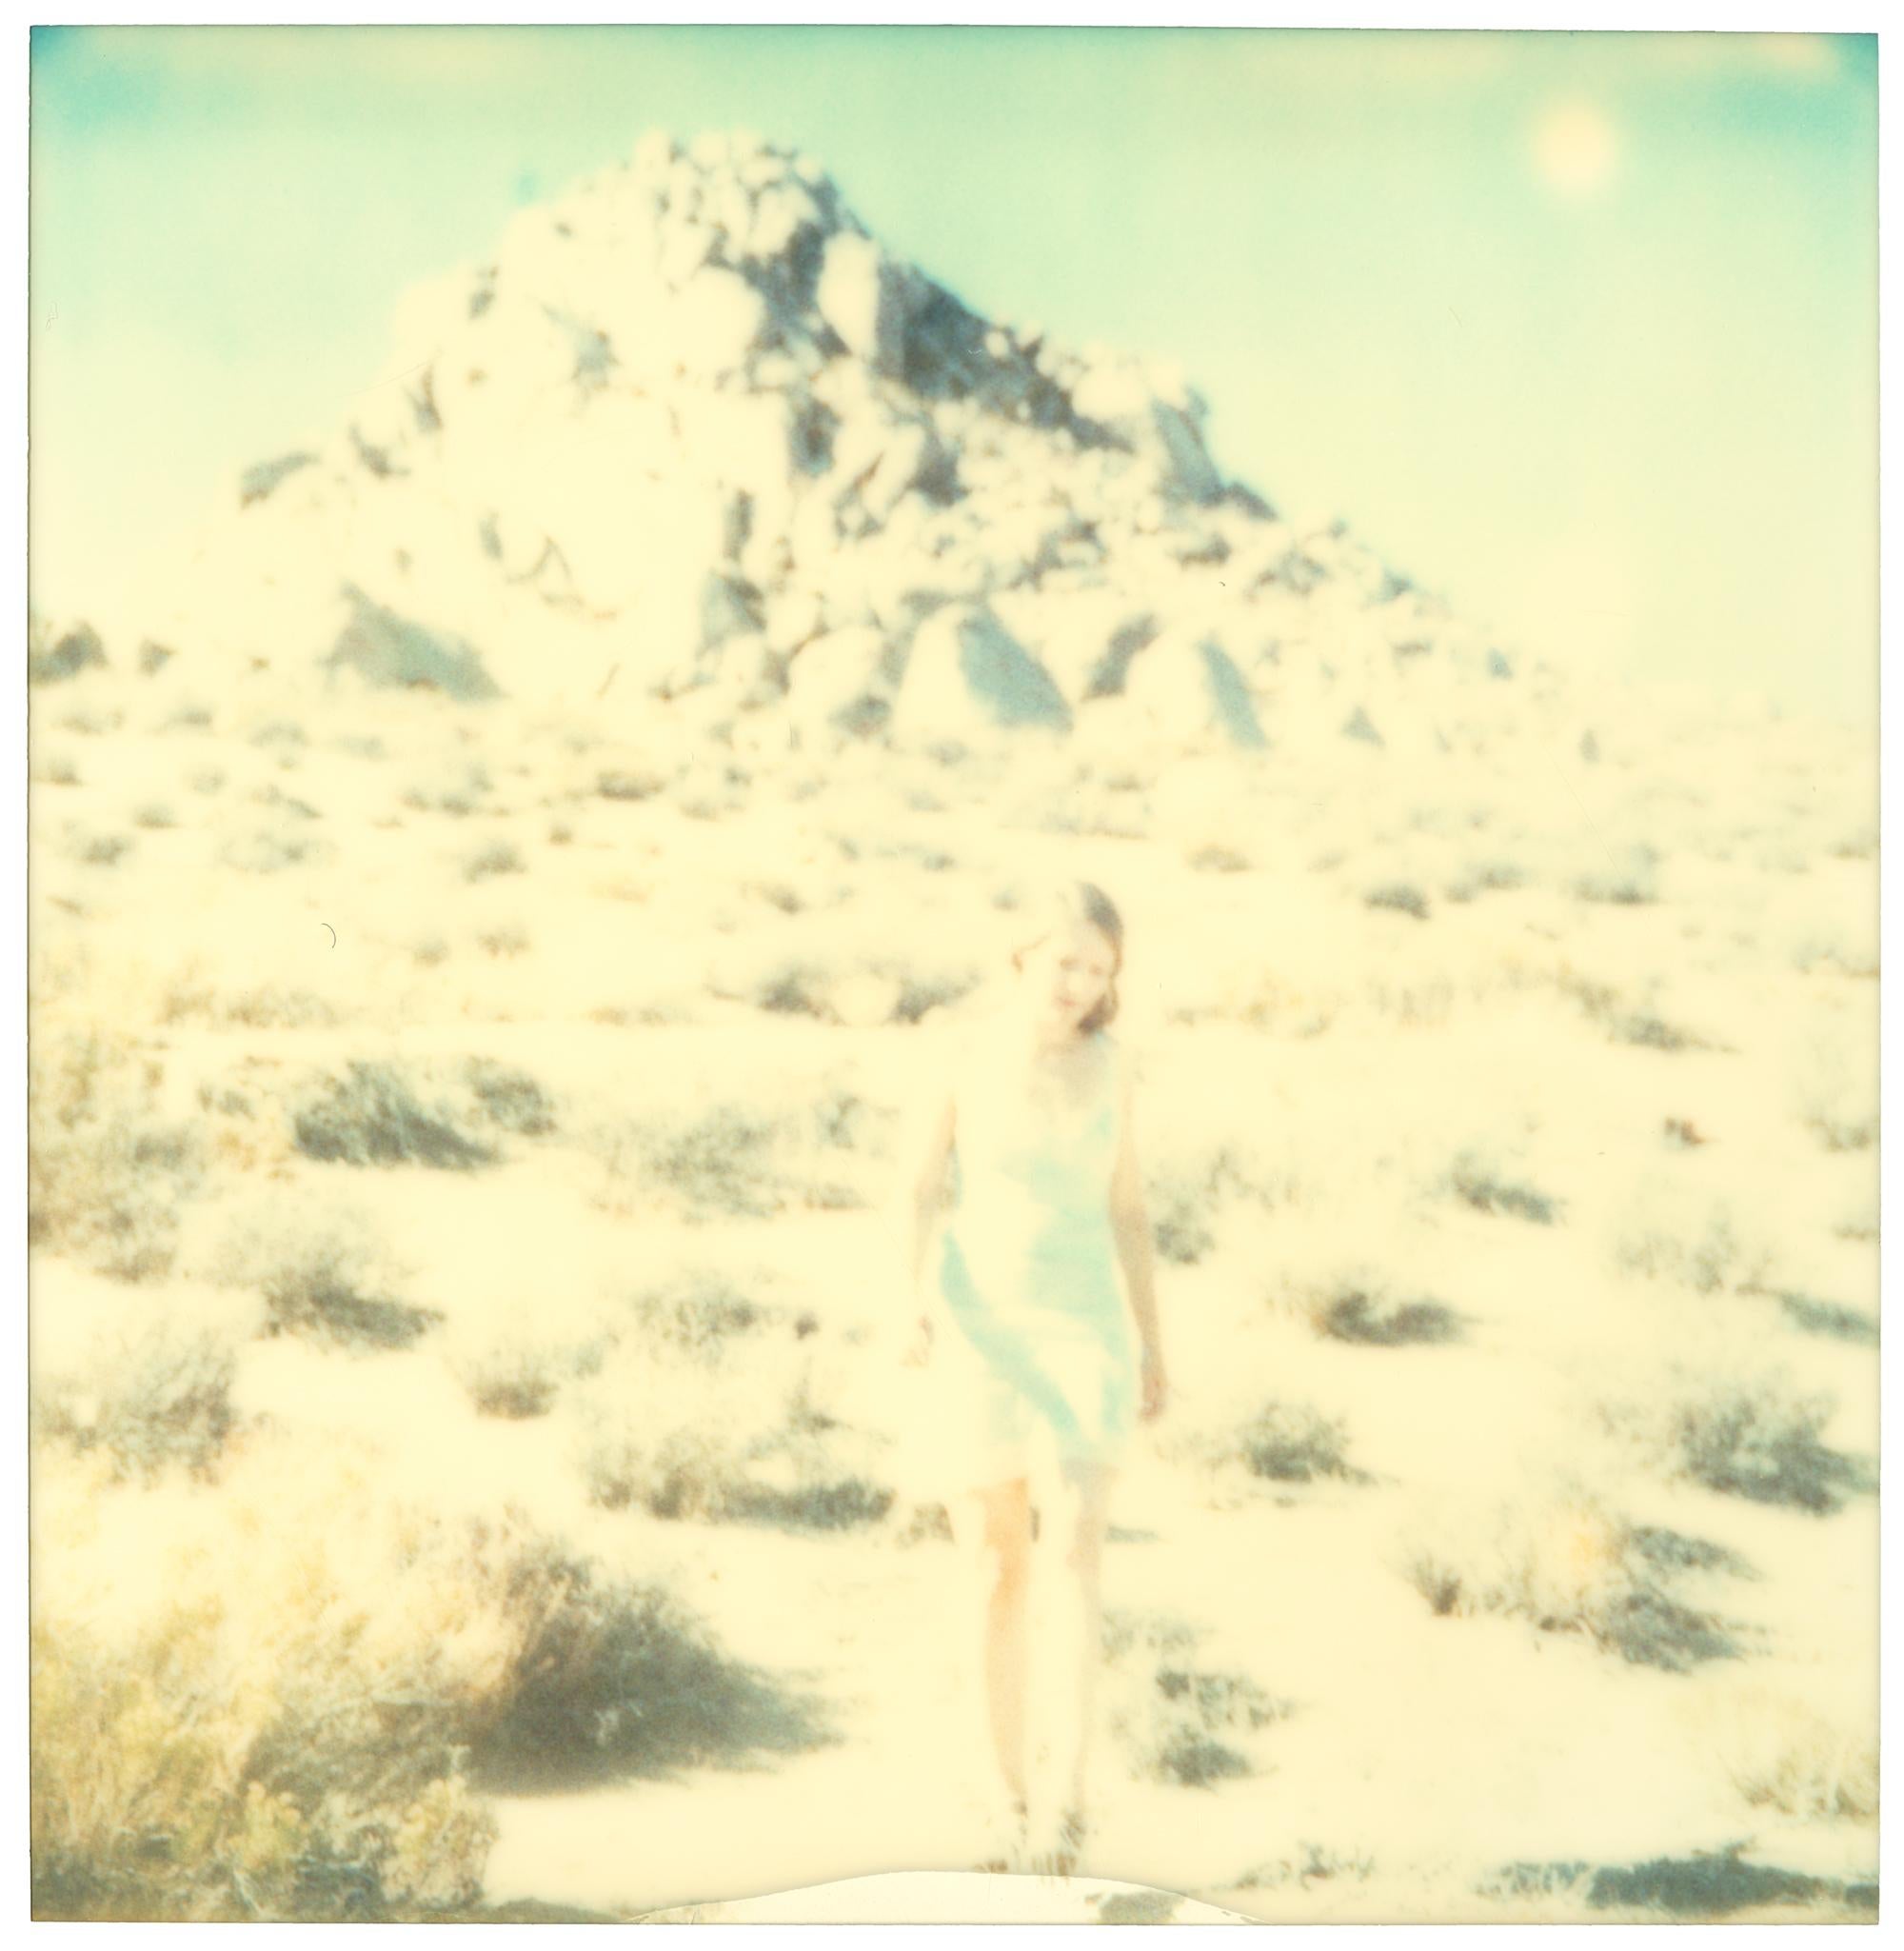 Aimless (Wastelands), triptych, analog, mounted - Polaroid, 21st Century, Color - Photograph by Stefanie Schneider